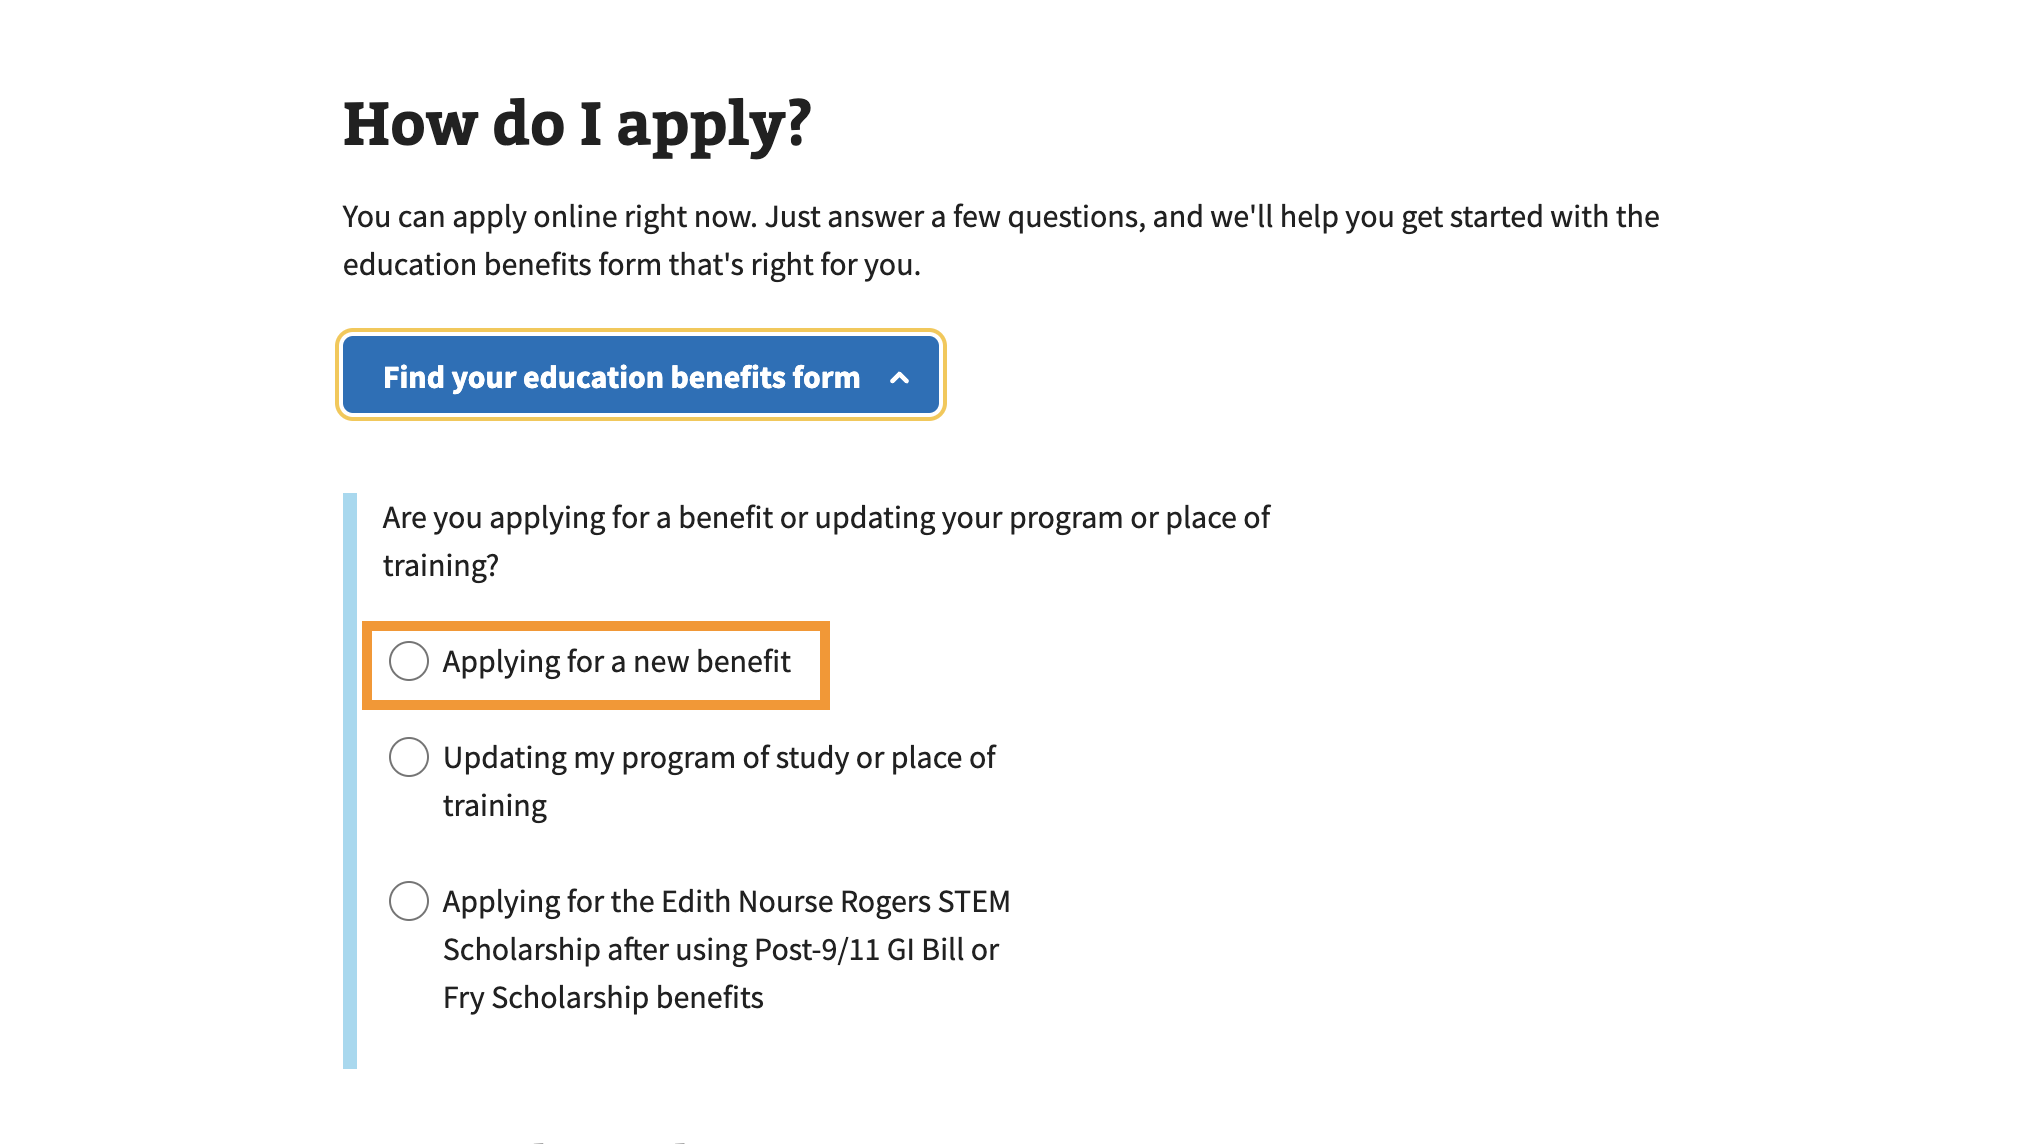 Screenshot of a 'va.gov' webpage featuring a prominent blue button labeled 'Find Your Education Benefits Form,' inviting users to access an educational benefits application.